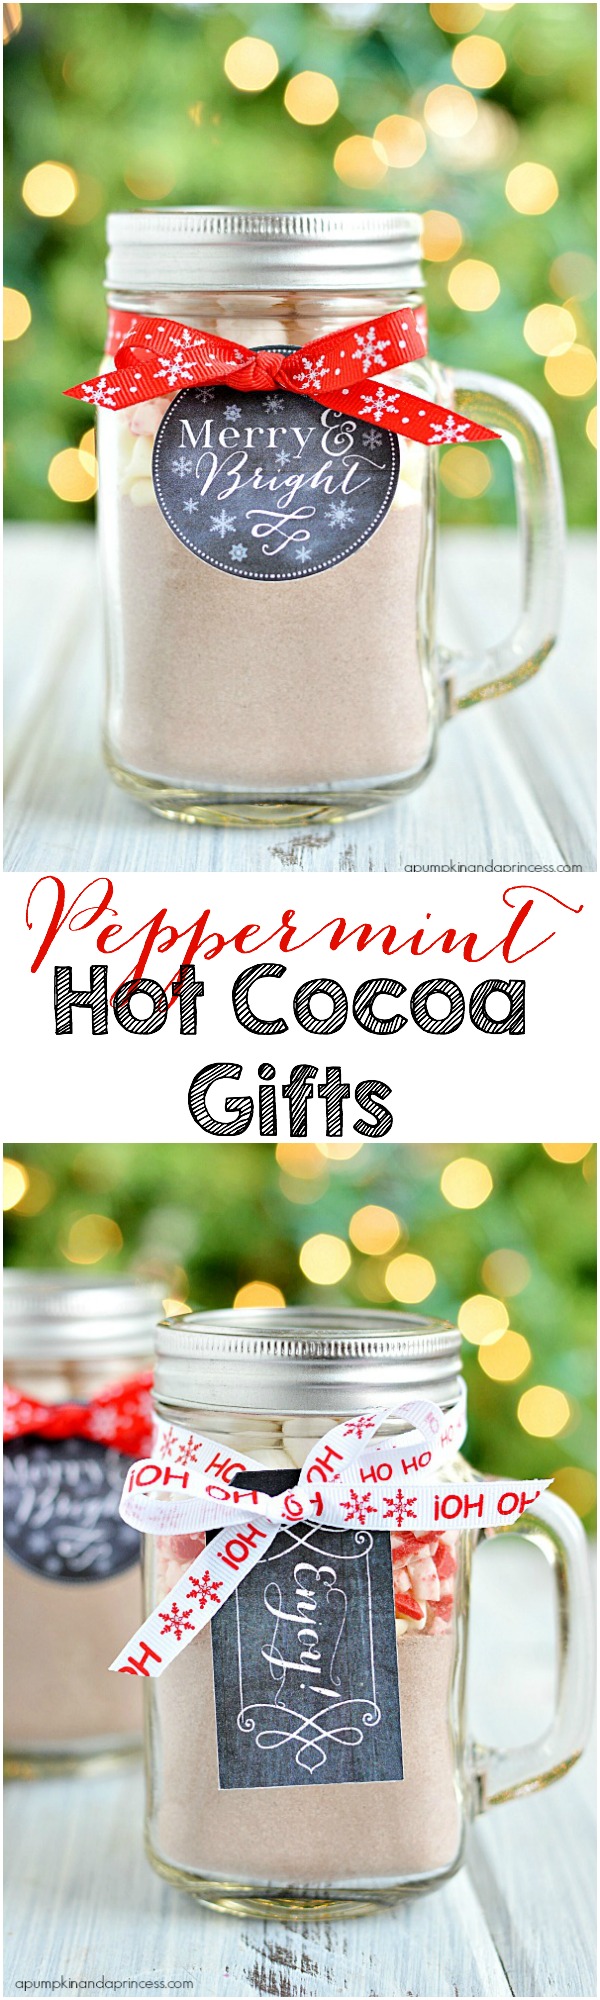 peppermint-hot-cocoa-gifts-printable-tags-a-pumpkin-and-a-princess